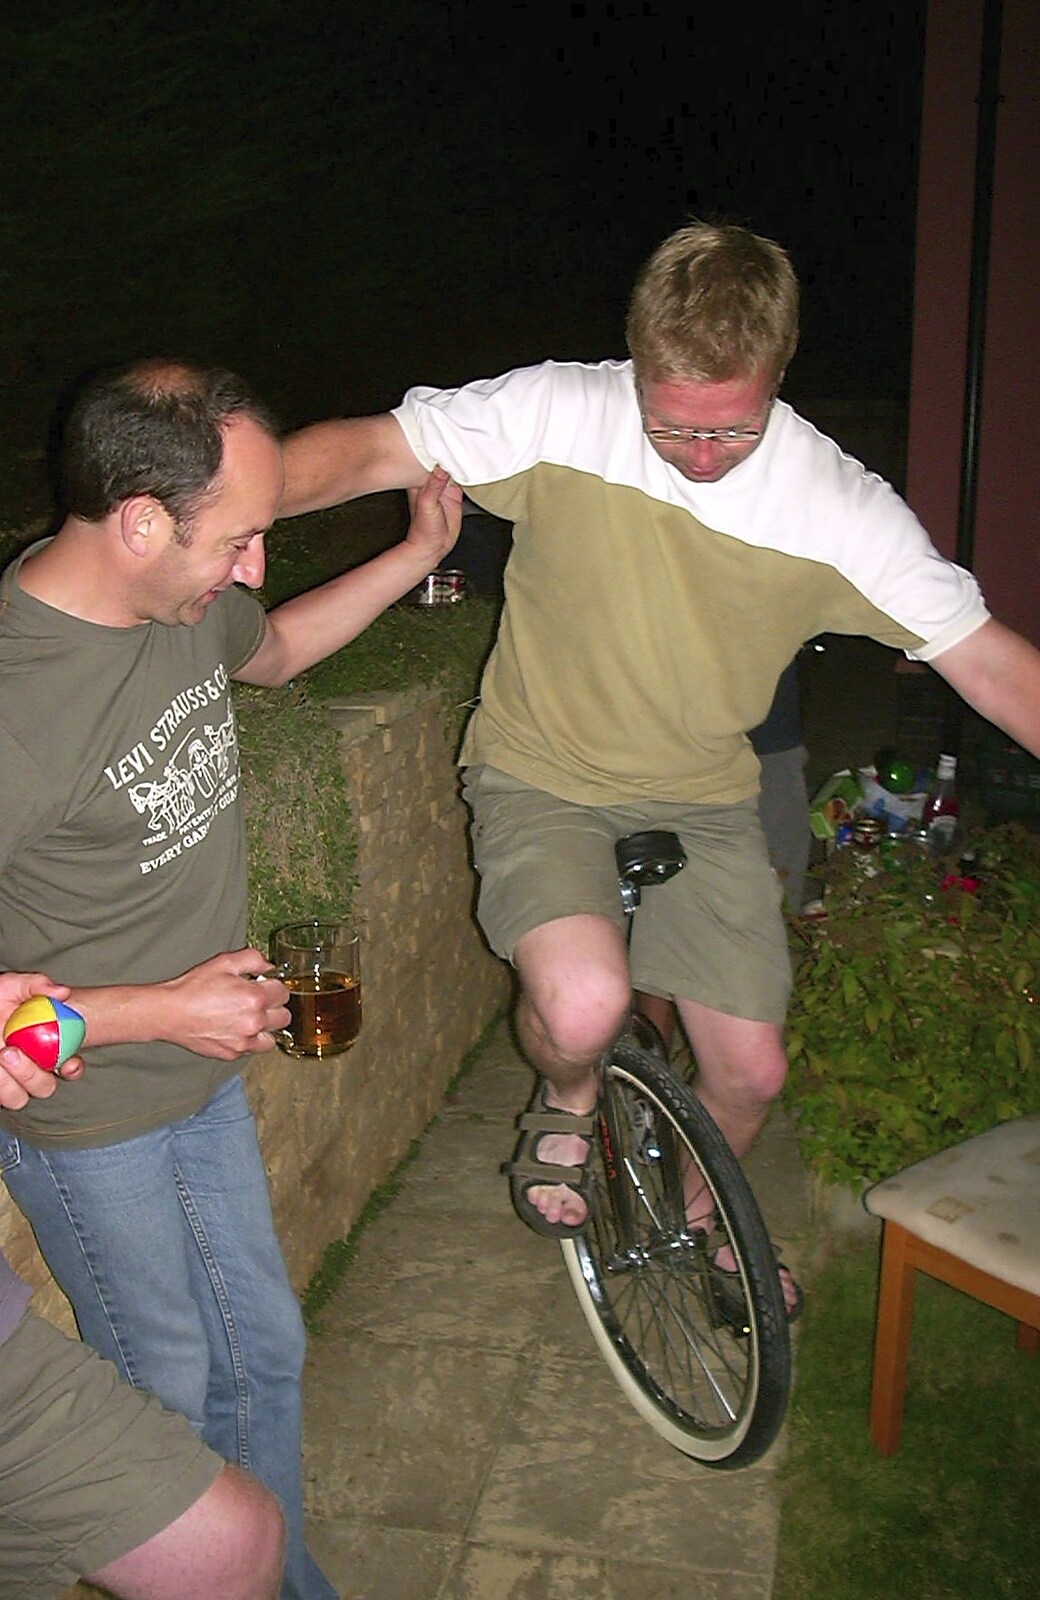 The BSCC in Debenham, and Bill's Housewarming Barbie, Yaxley, Suffolk - 31st July 2004: Marc tries out a unicycle